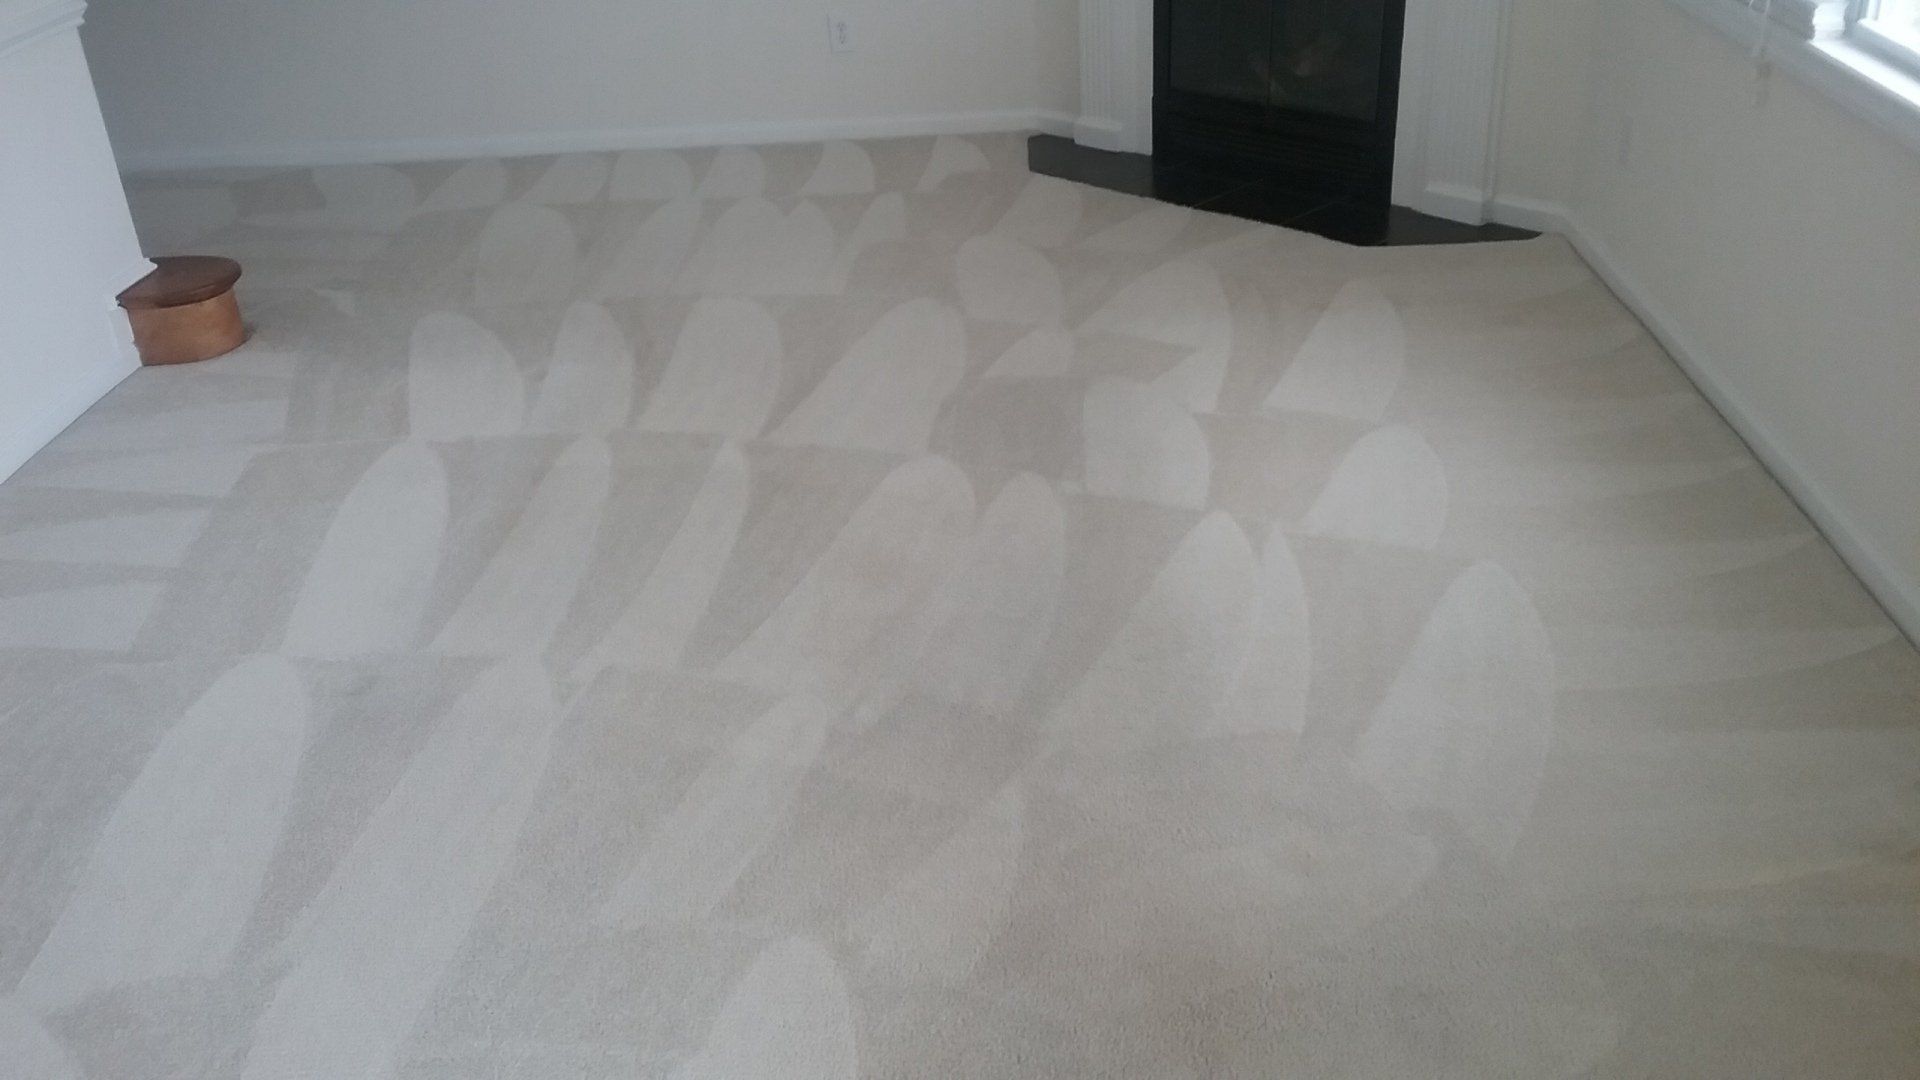 Clean Carpet After - Greenville, NC - Jansen Upholstery & Carpet Cleaning